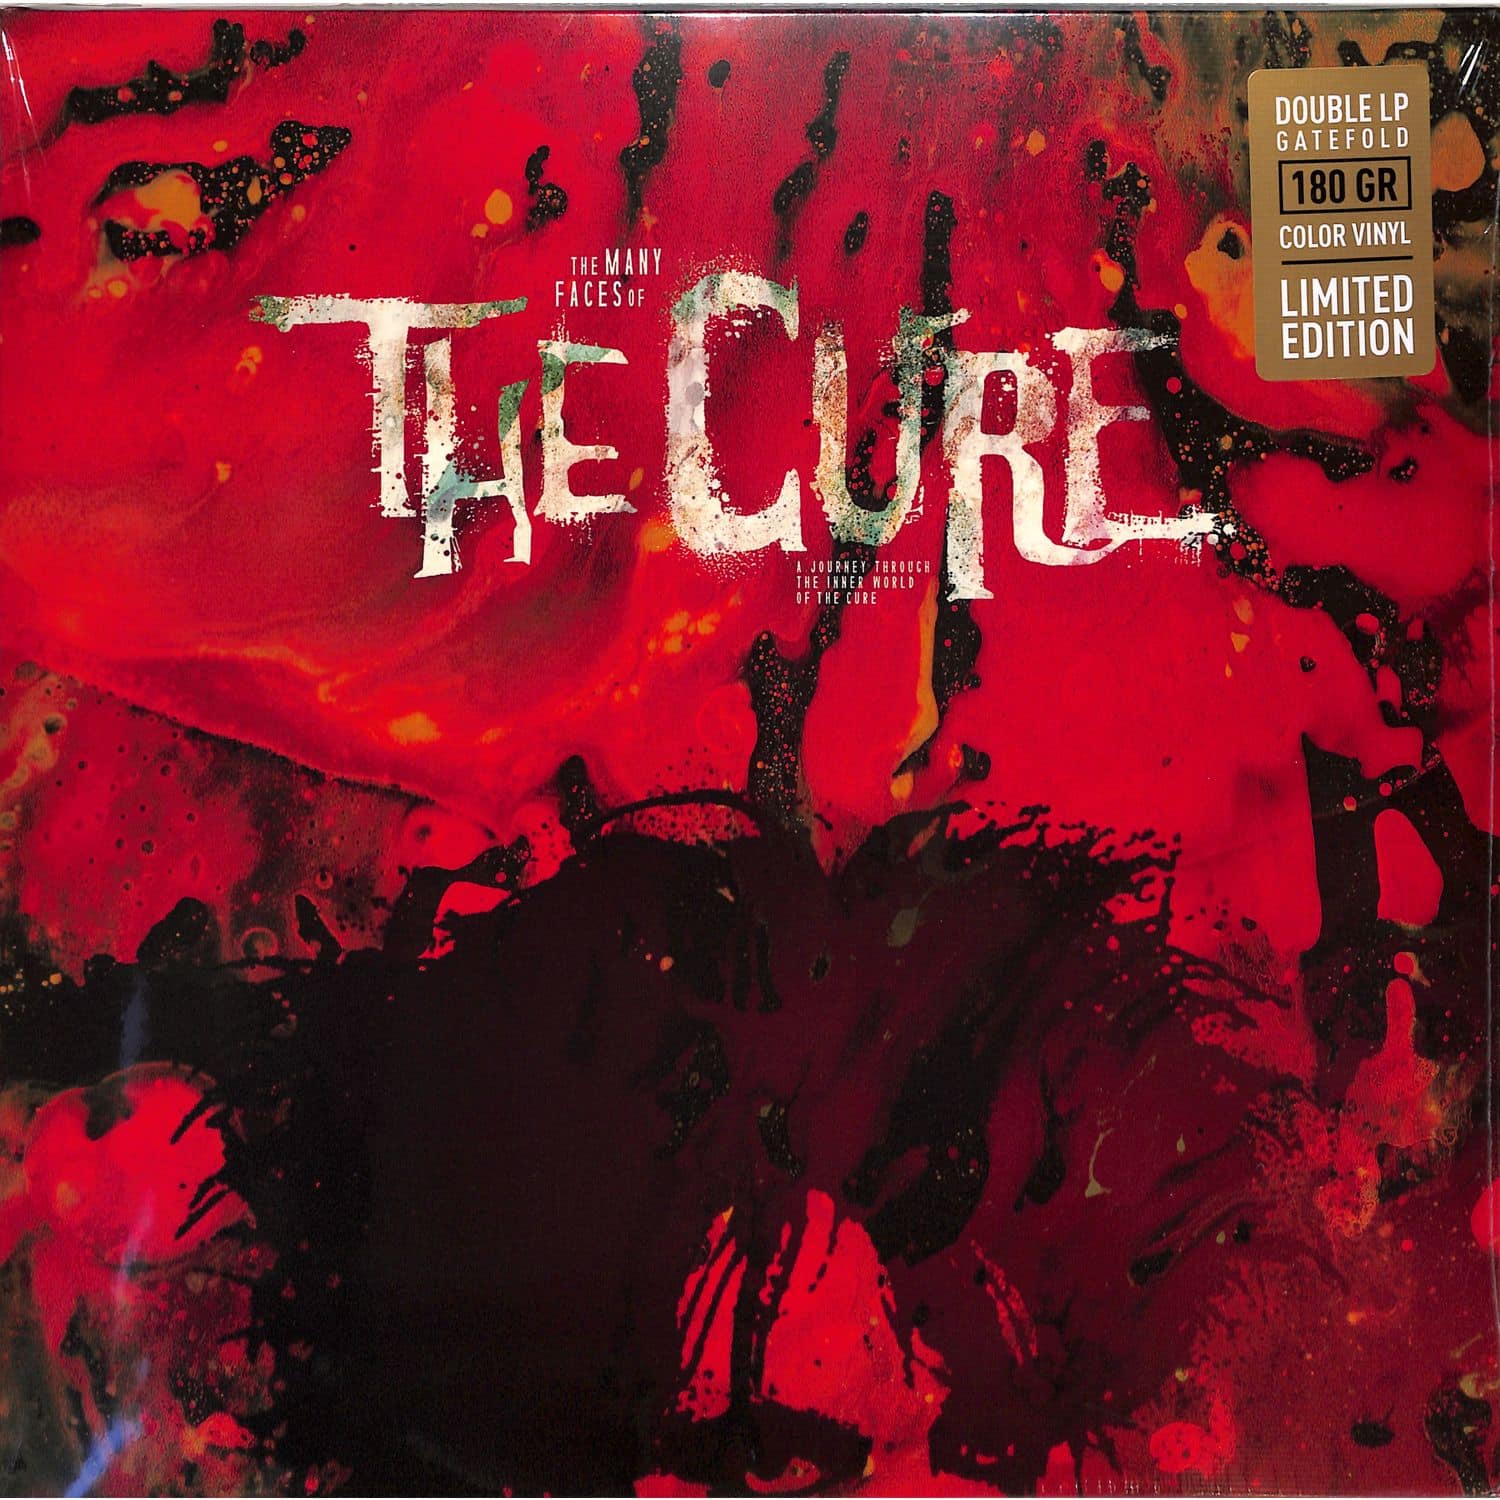 The Cure / Various - MANY FACES OF THE CURE 